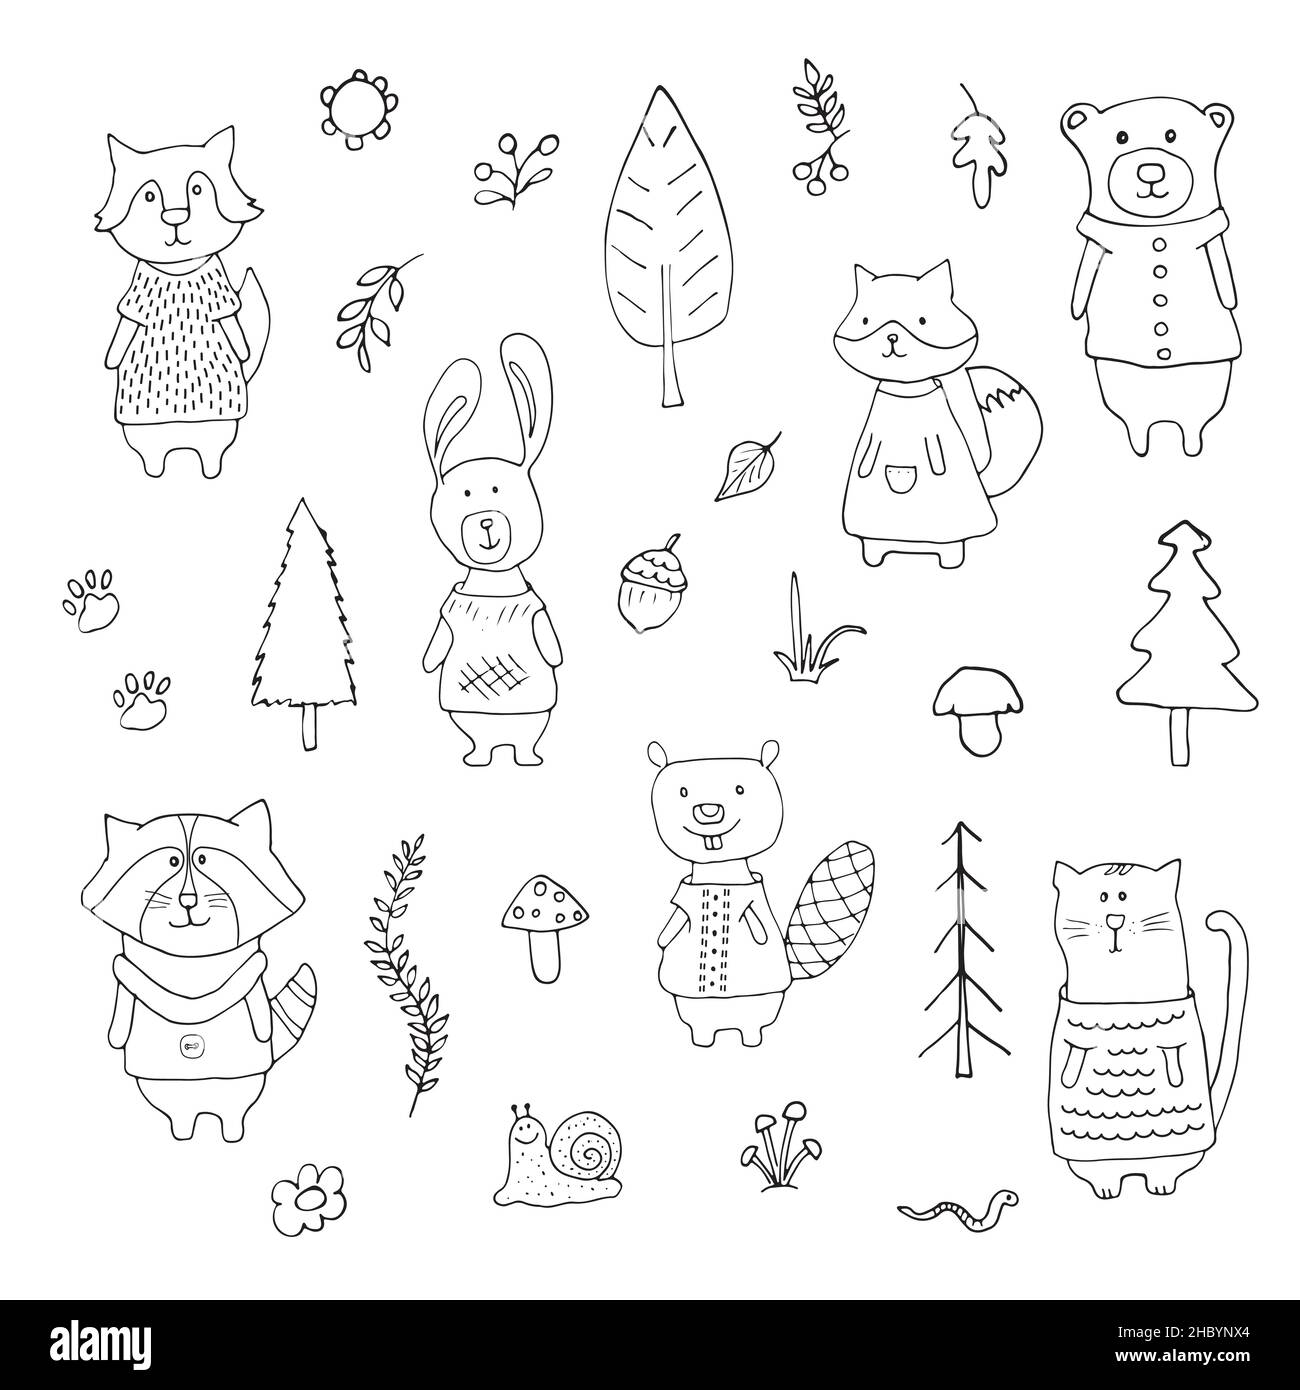 Cute Animals in clothes. Cartoon forest wildlife animals collection ...